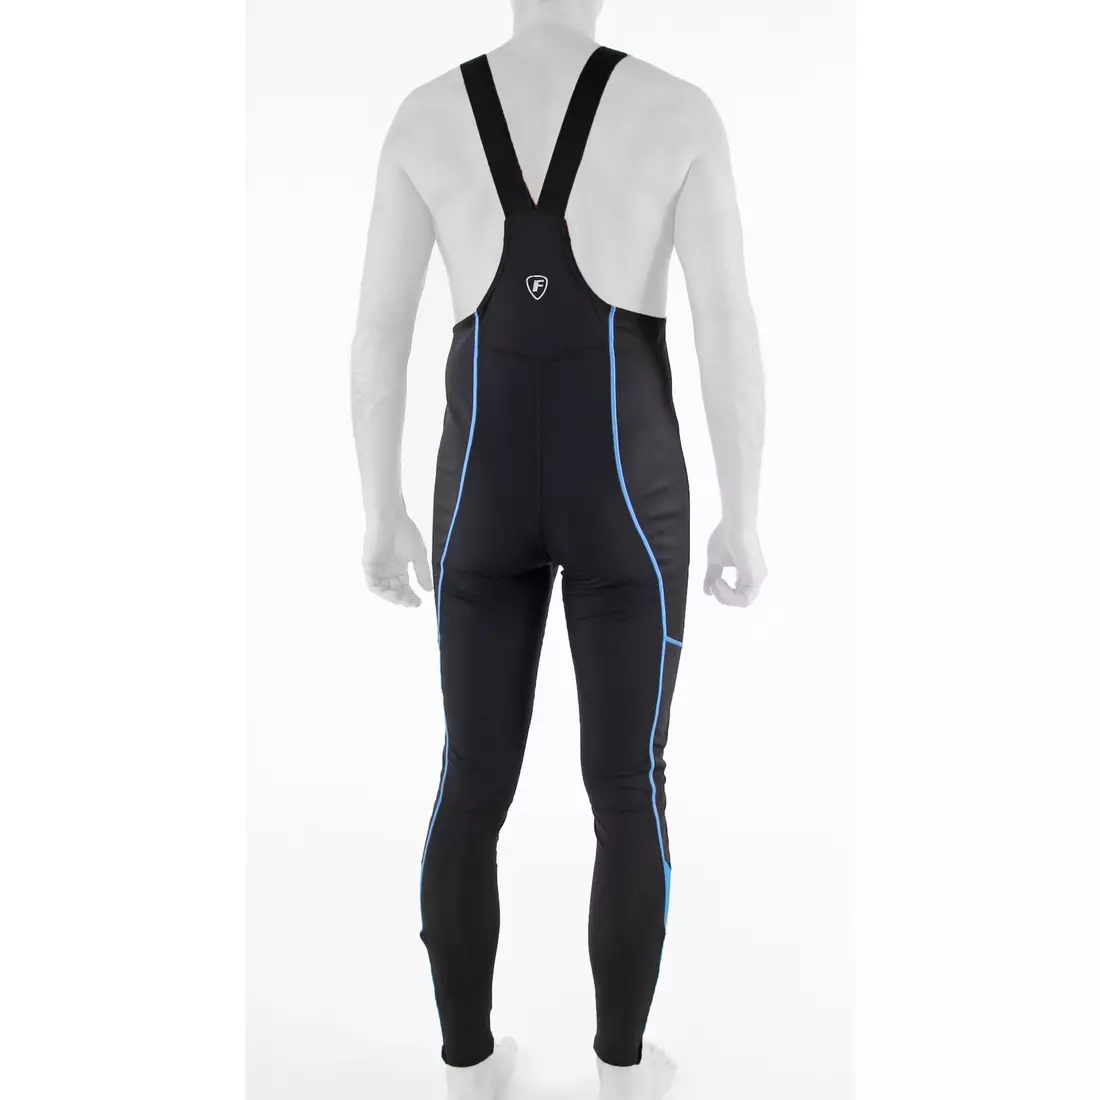 FDX 1300 insulated softshell cycling pants, black and blue